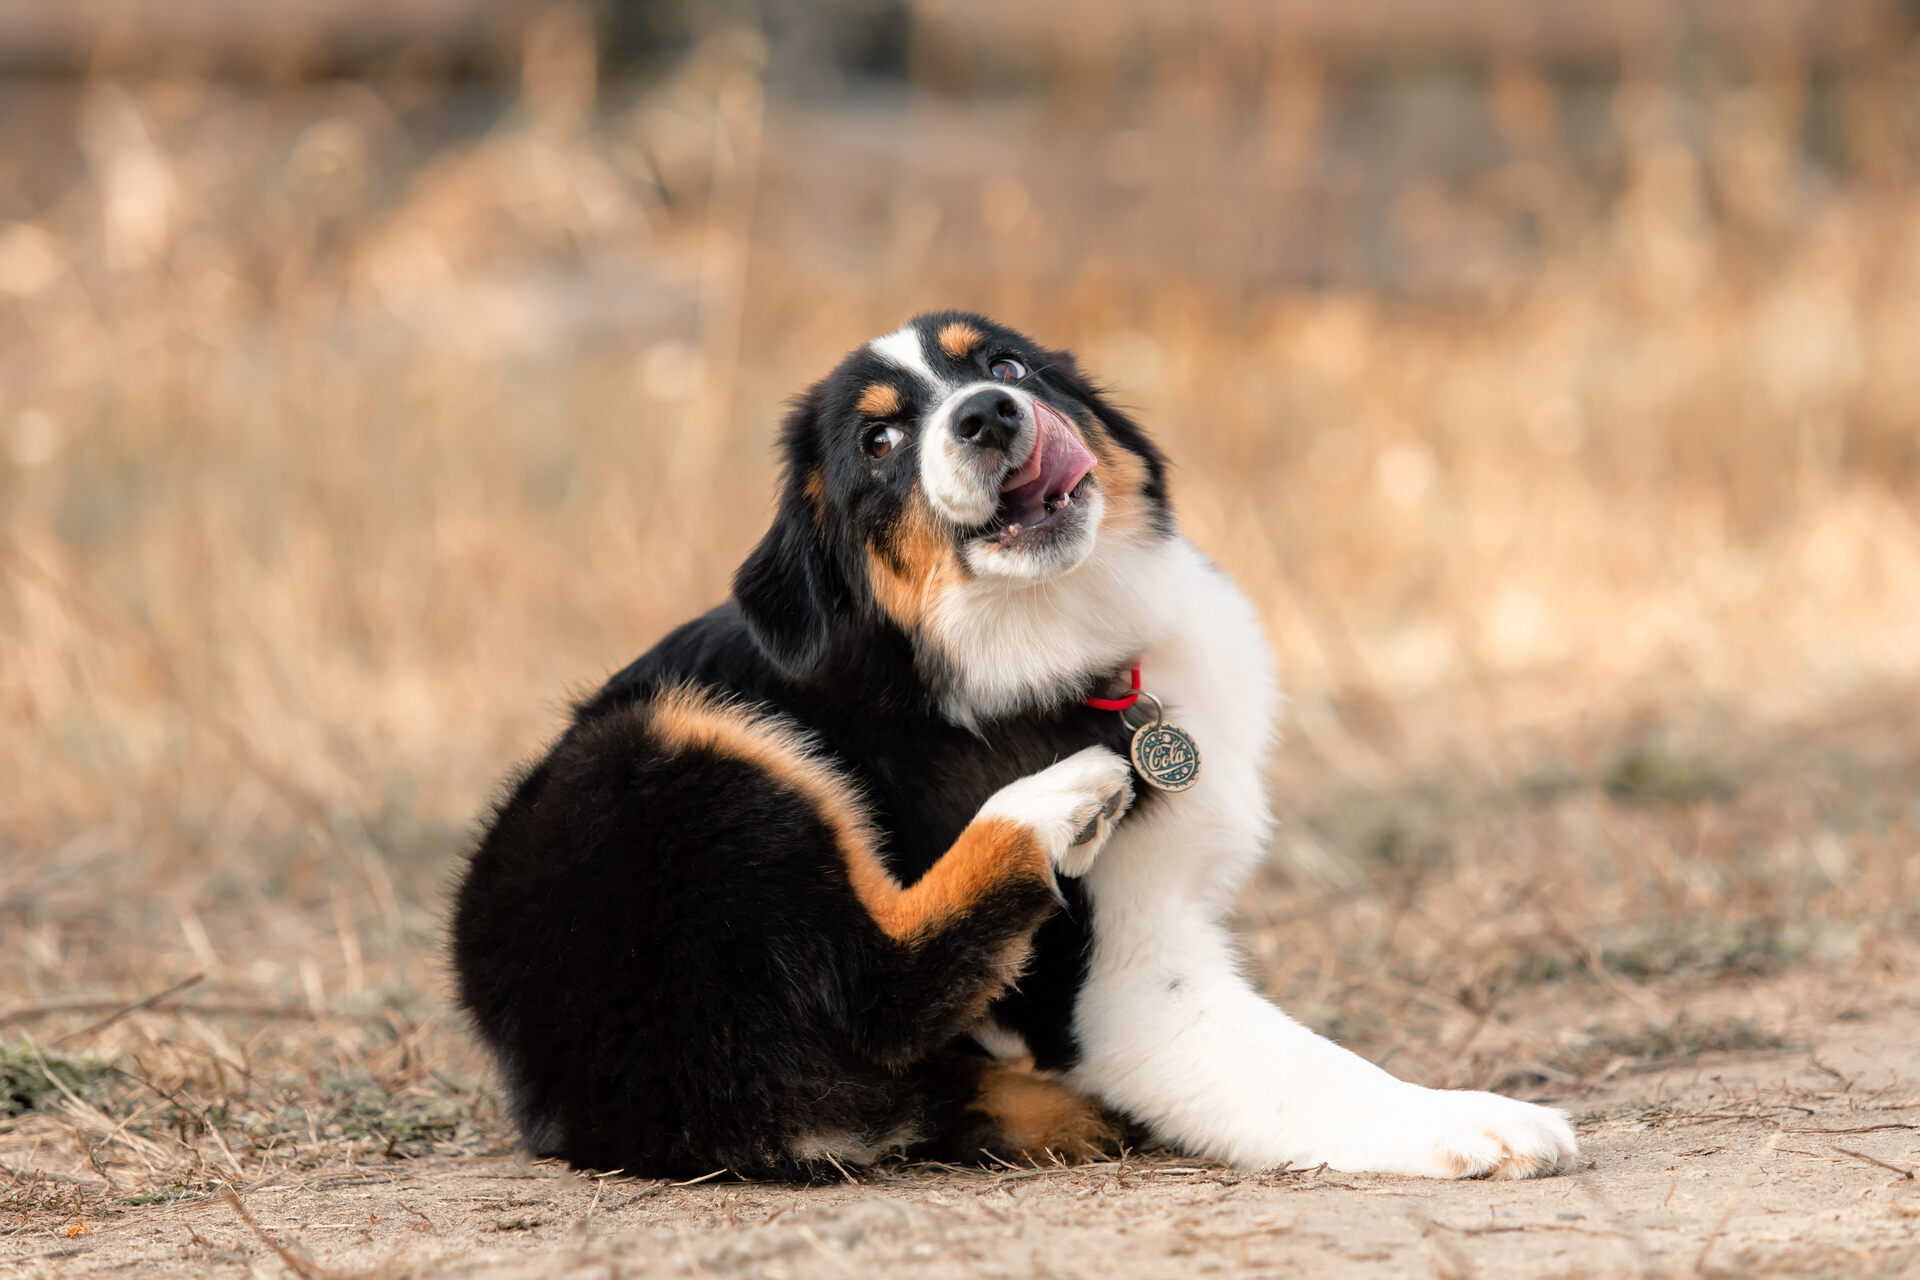 A Bernese mountain dog puppy scratching themselves